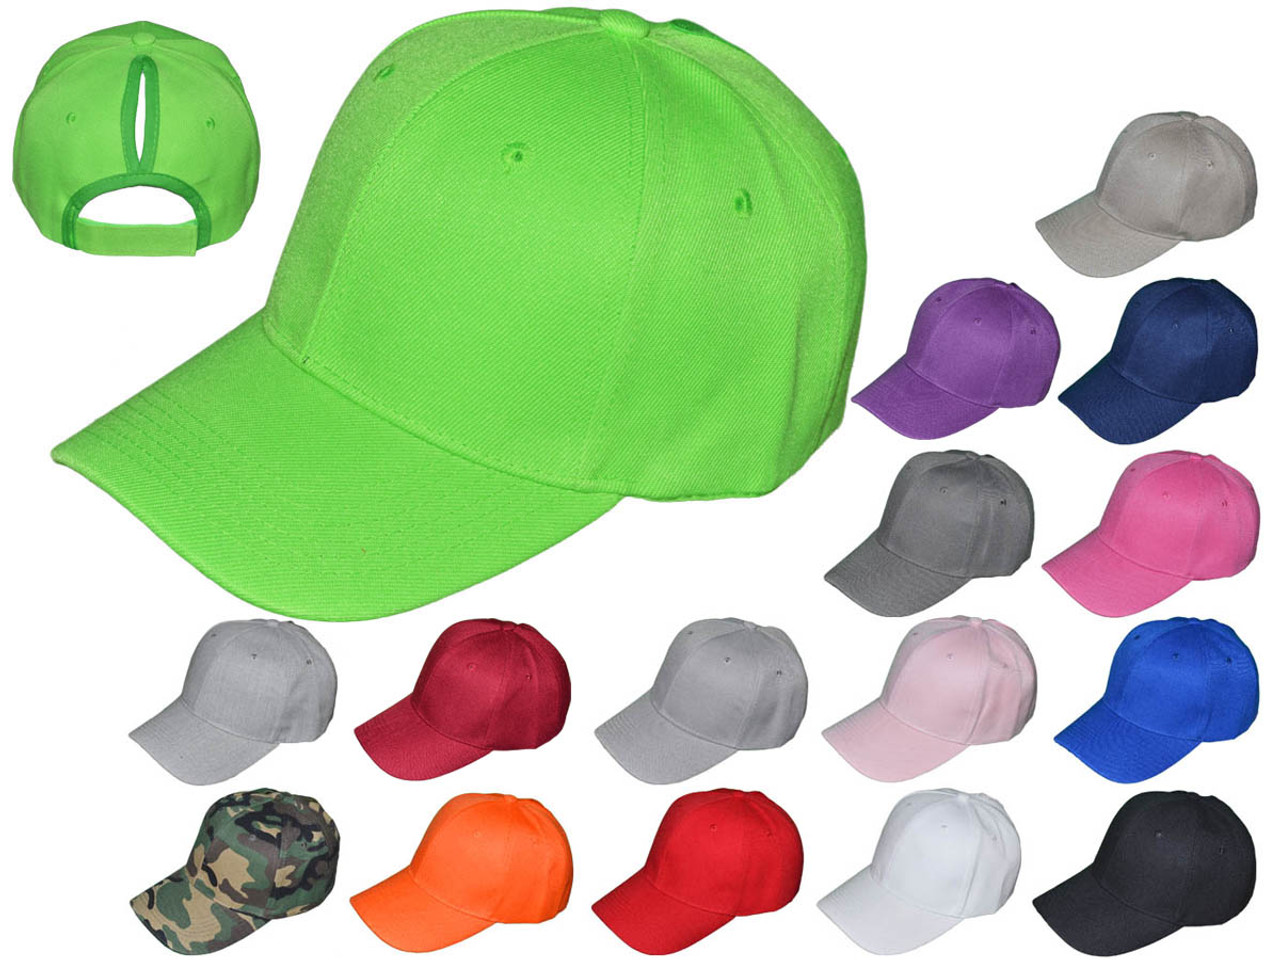 Colored Brim Fitted Hats - Hats for cheap wholesale